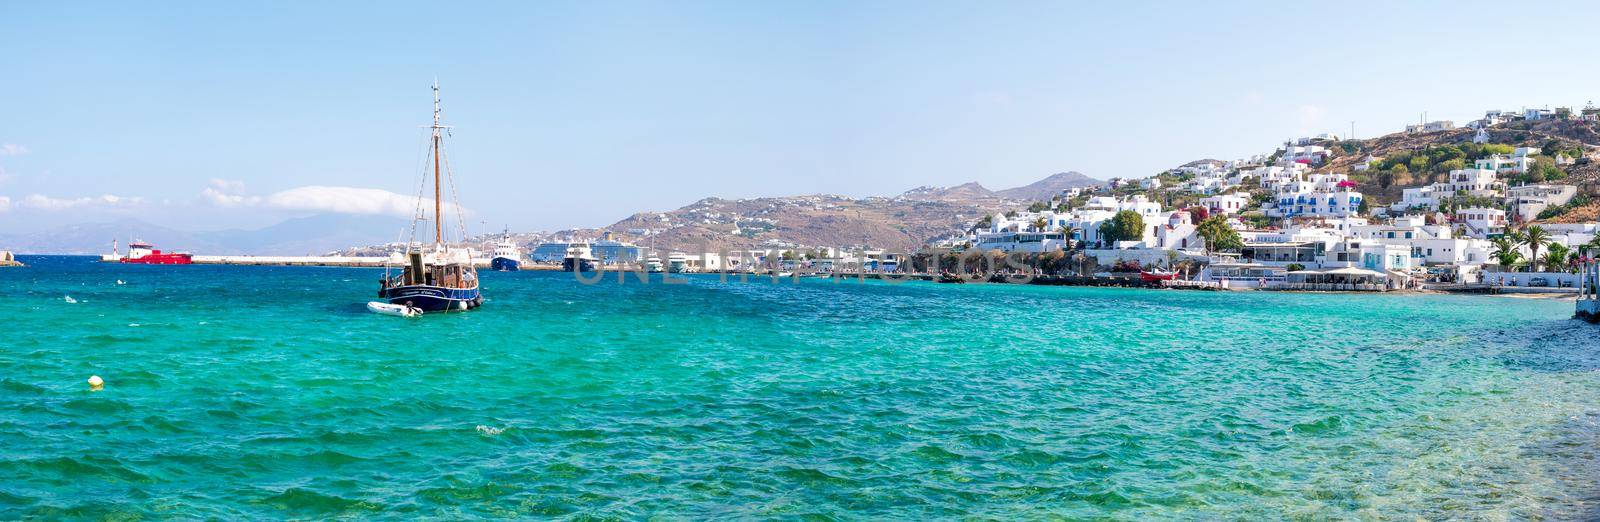 Panoramic view of Greek seaside town and floating ships in water by tan4ikk1